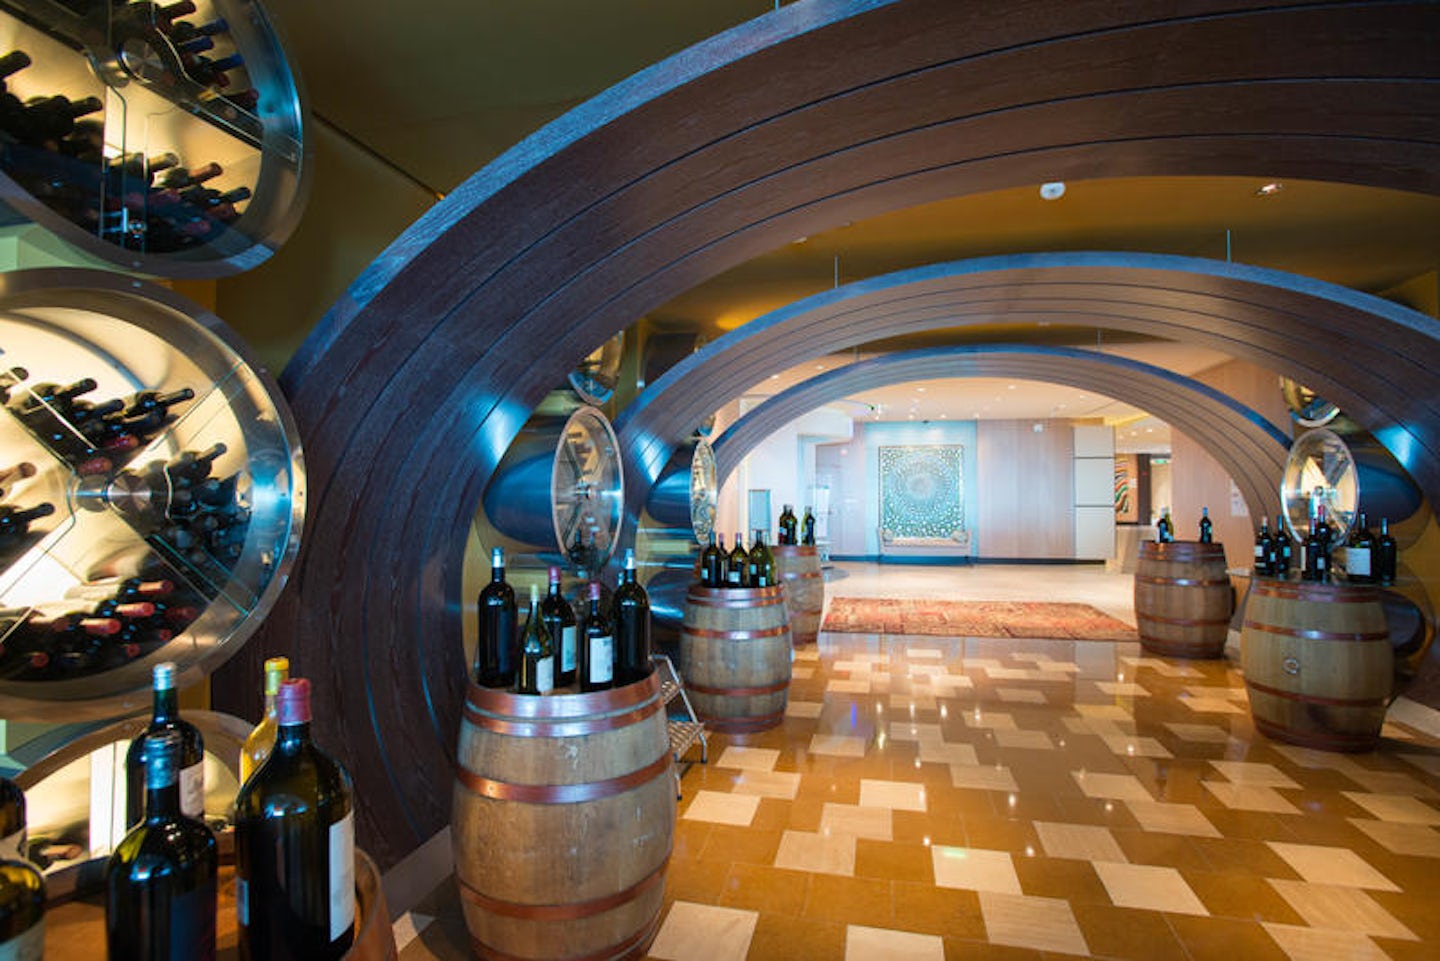 Tuscan Grille on Celebrity Eclipse